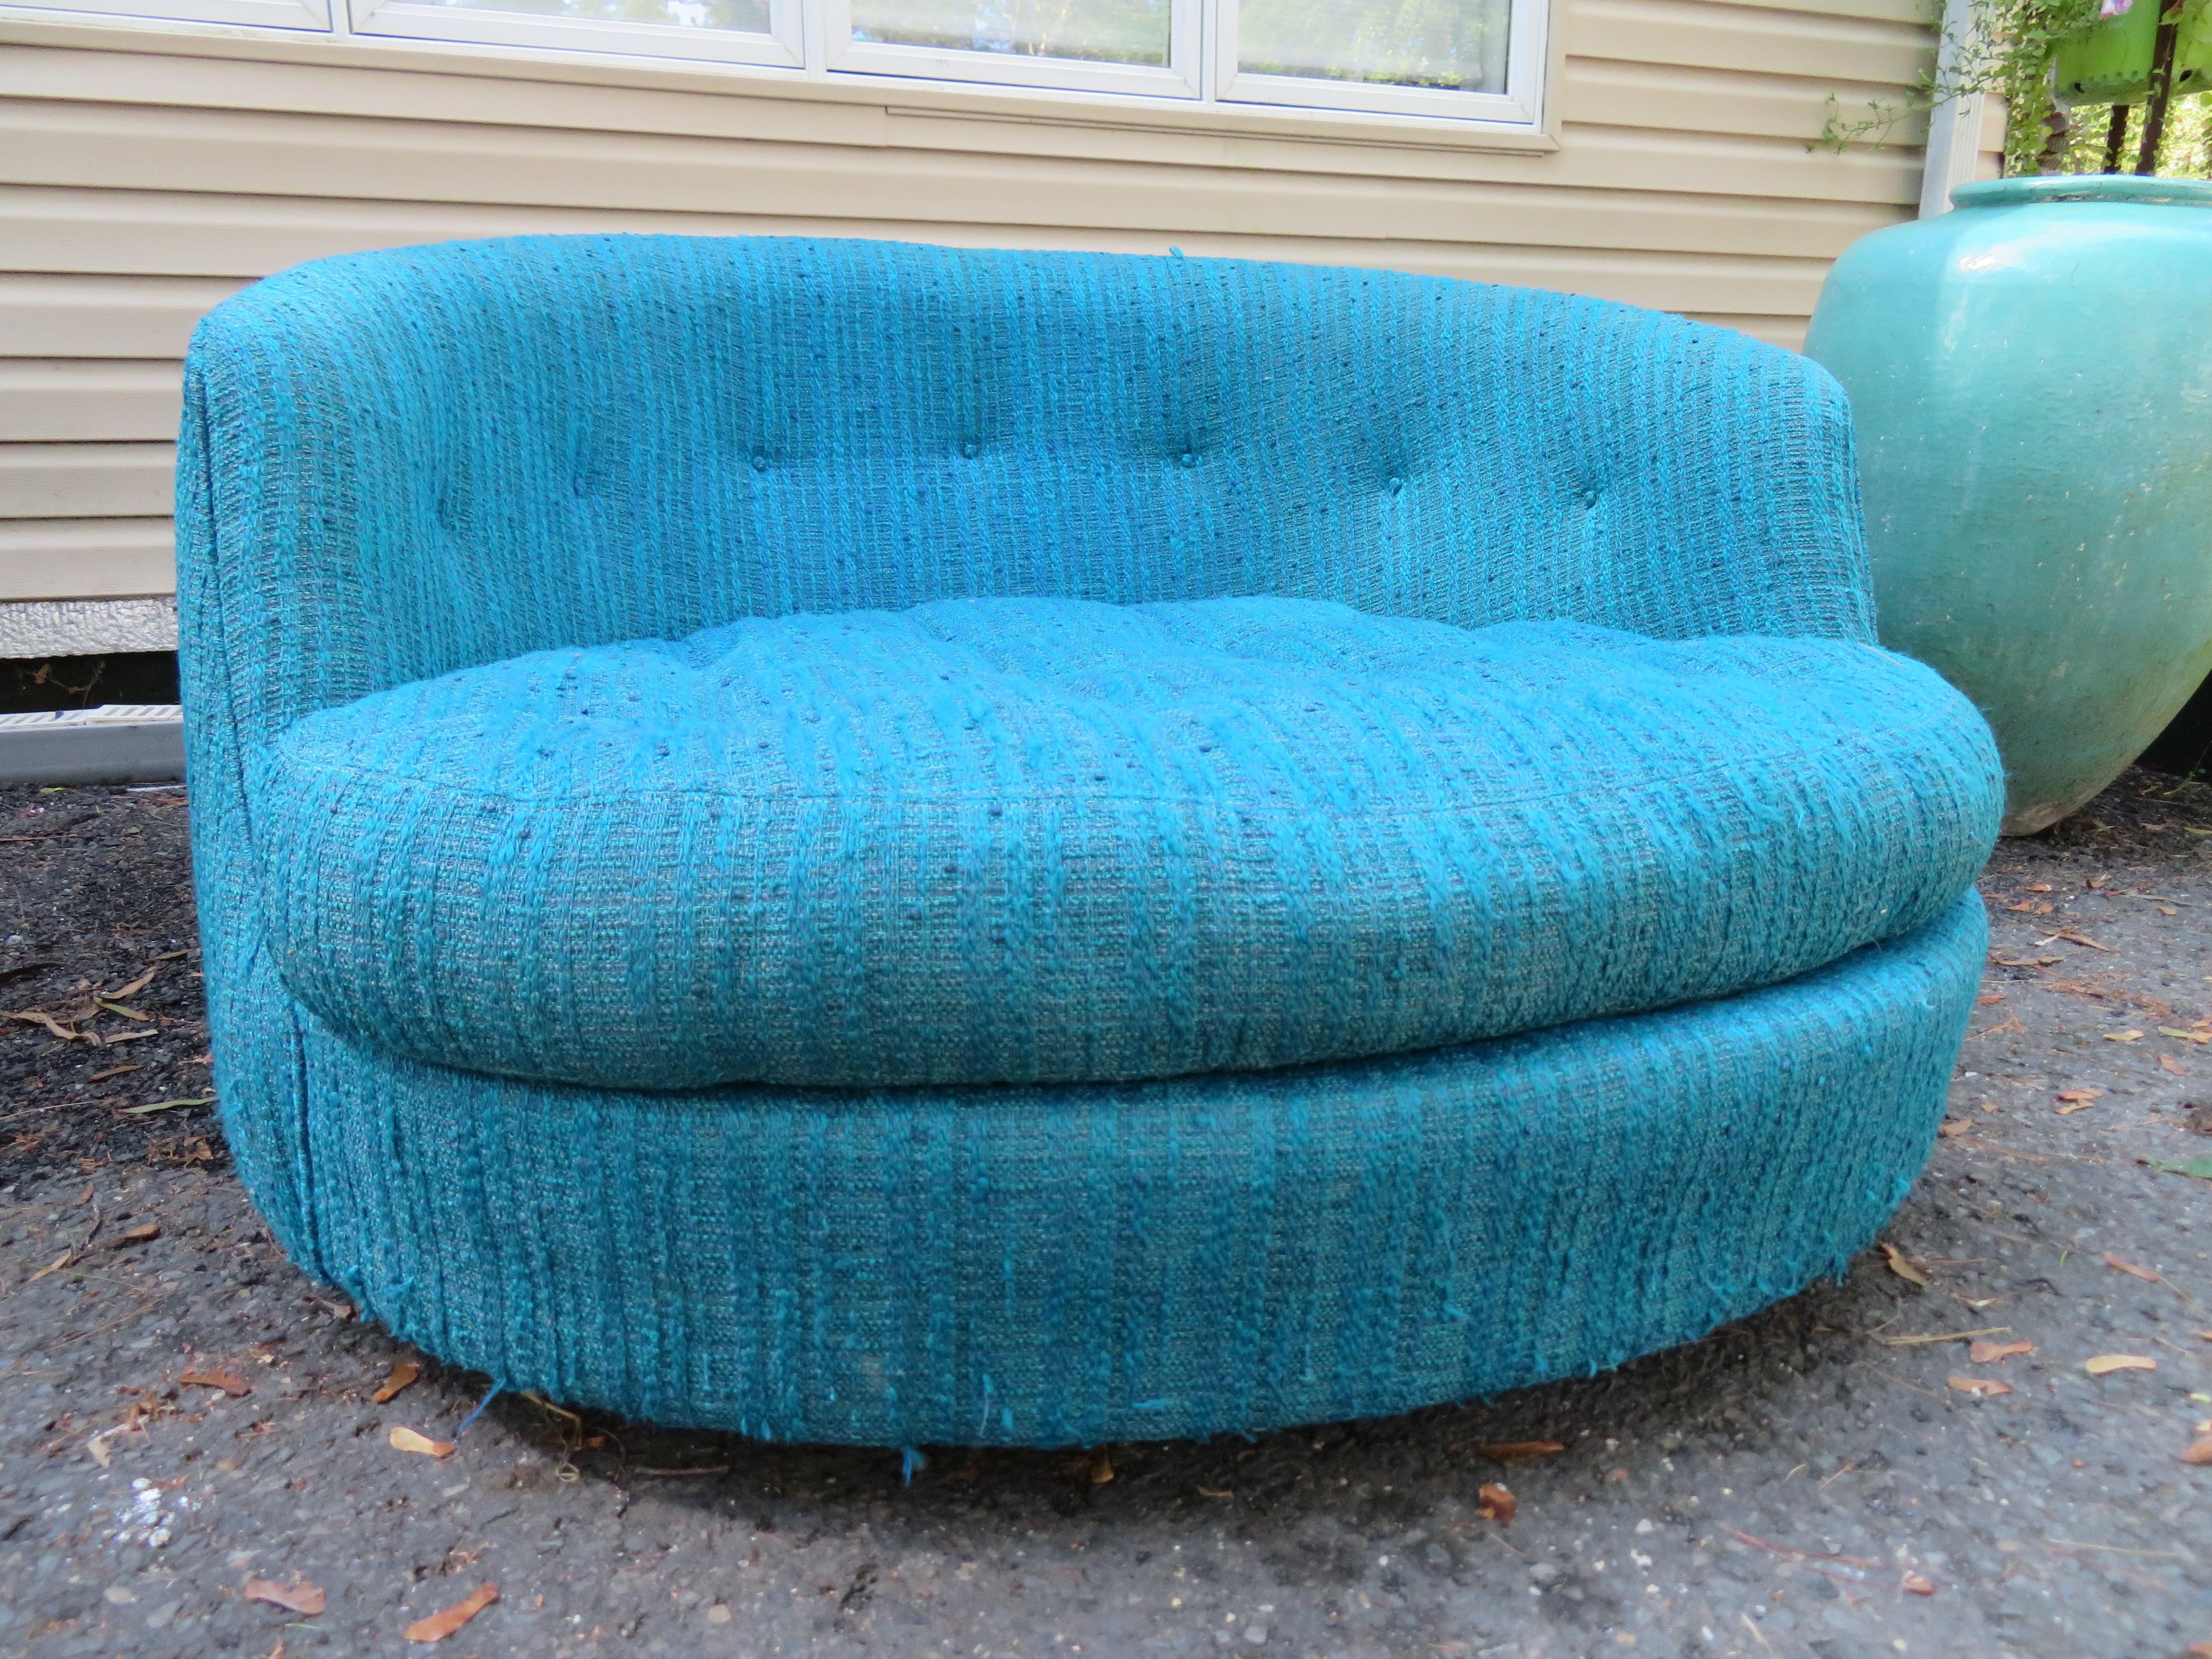 Gorgeous Milo Baughman for Thayer Coggin oversized circular swivel lounge chair. This piece retains its original turquoise blue wool woven fabric in usable condition, some pulls and loose strings-reupholstery is recommended. You will love the style